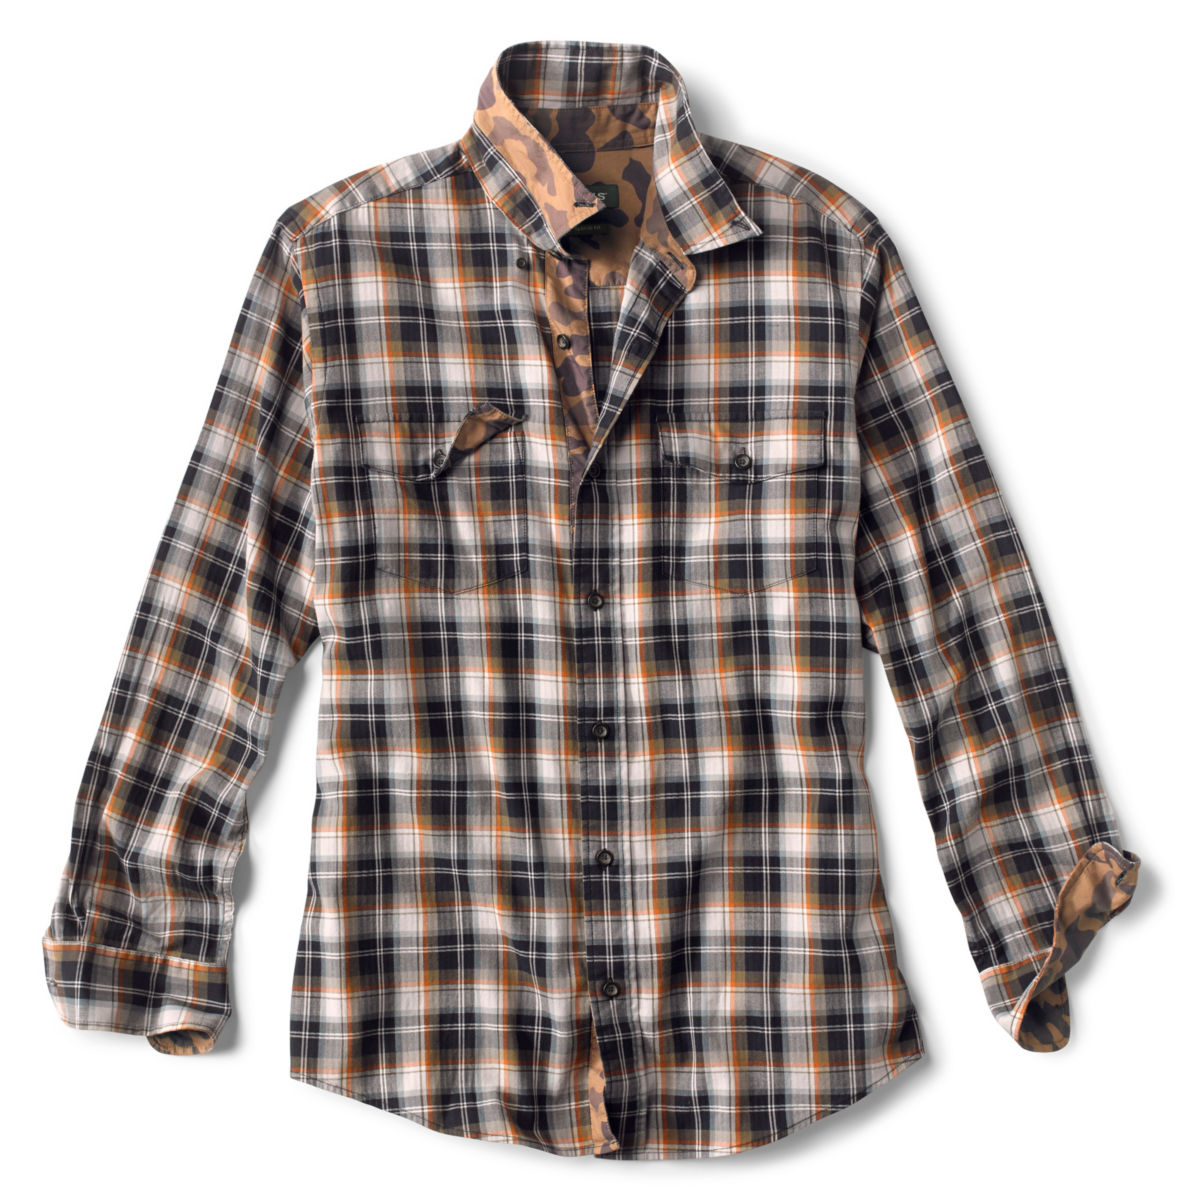 Orvis 1971 Camo Plaid Long-Sleeved Shirt - image number 0